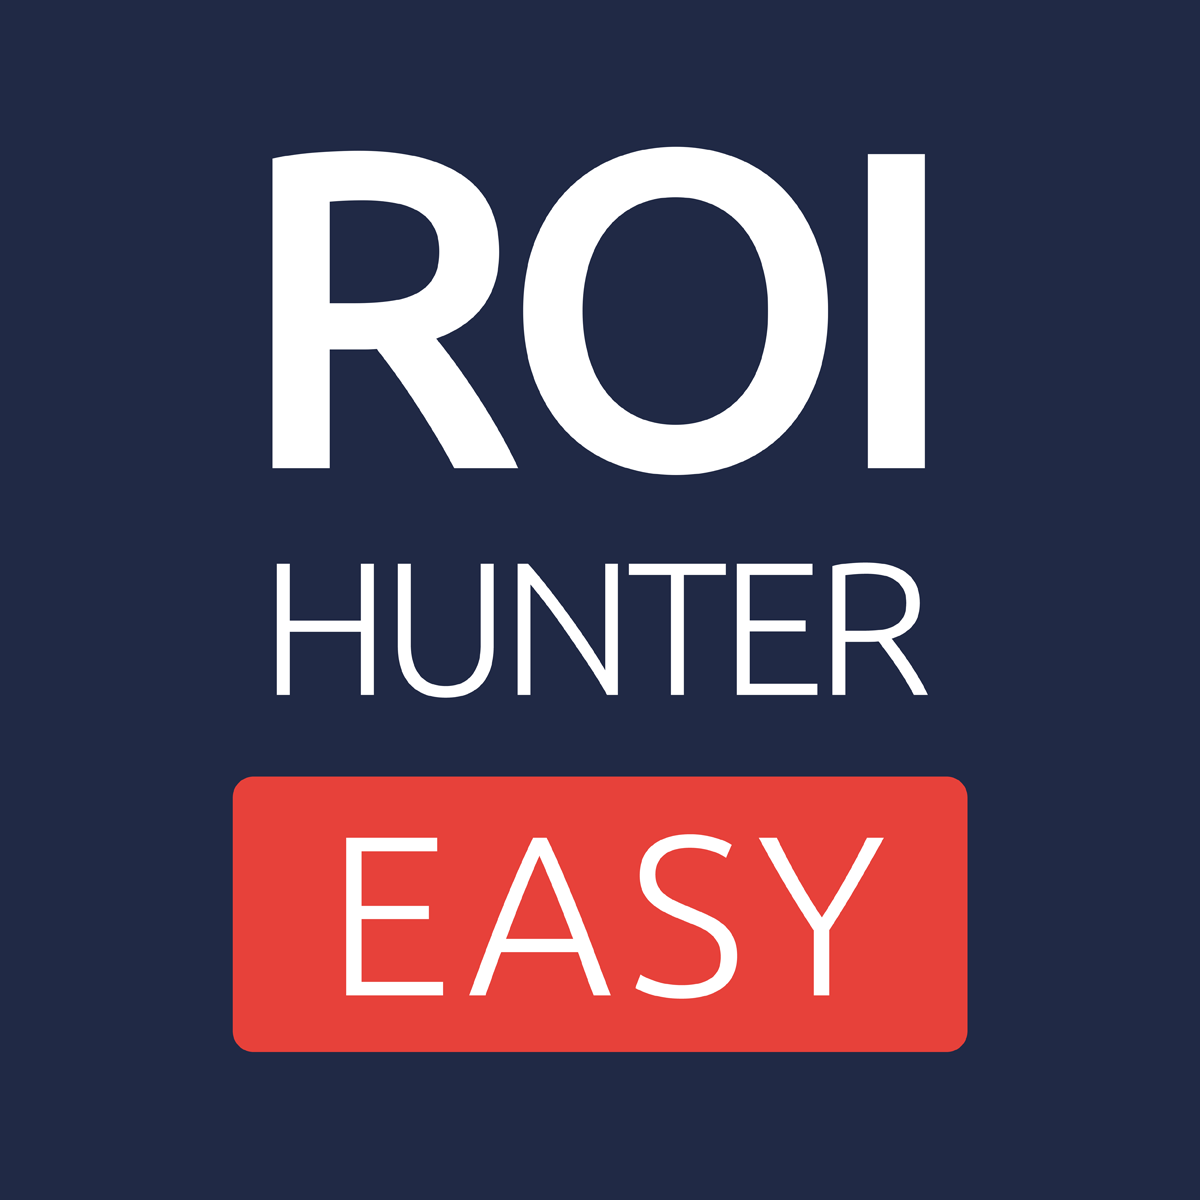 Shopify Get Traffic Apps by Roi hunter